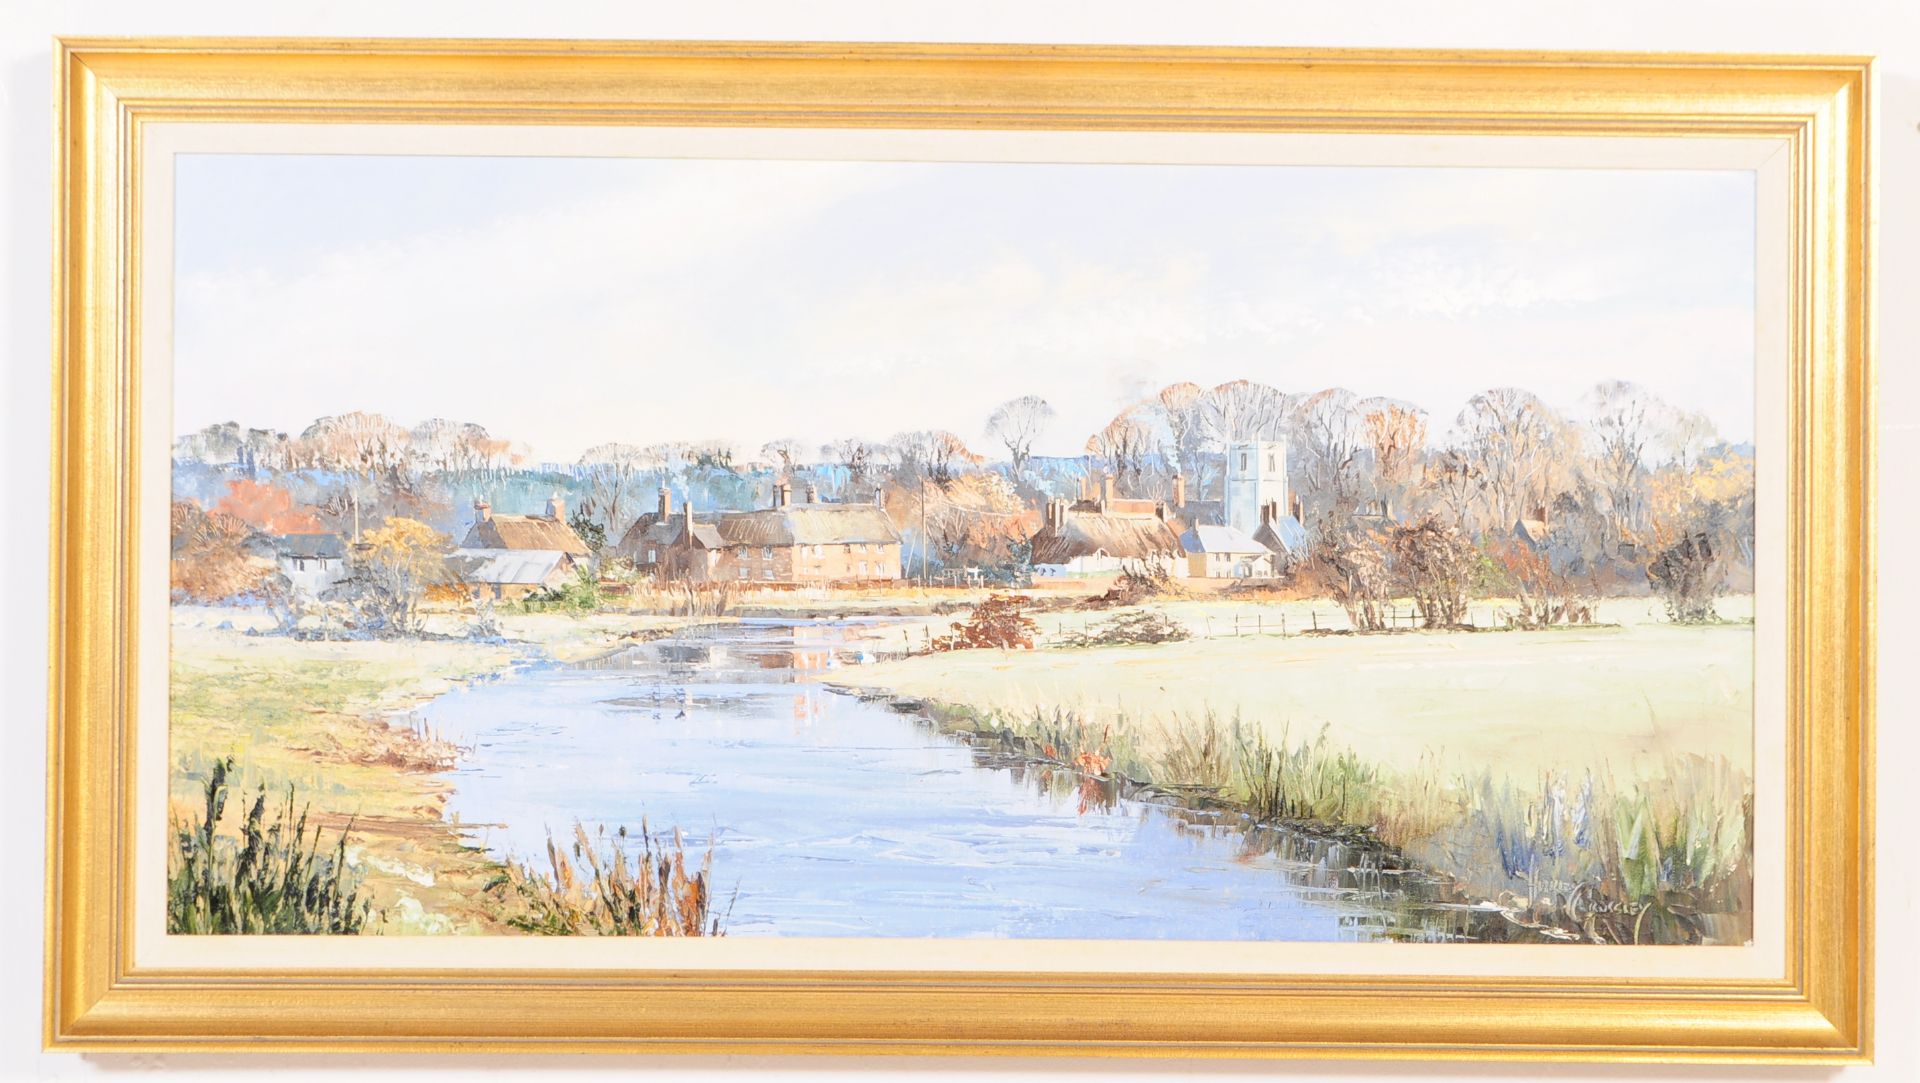 OIL ON CANVAS CANAL RIVER SCENE BY HARLEY CROSSLEY - Image 2 of 6